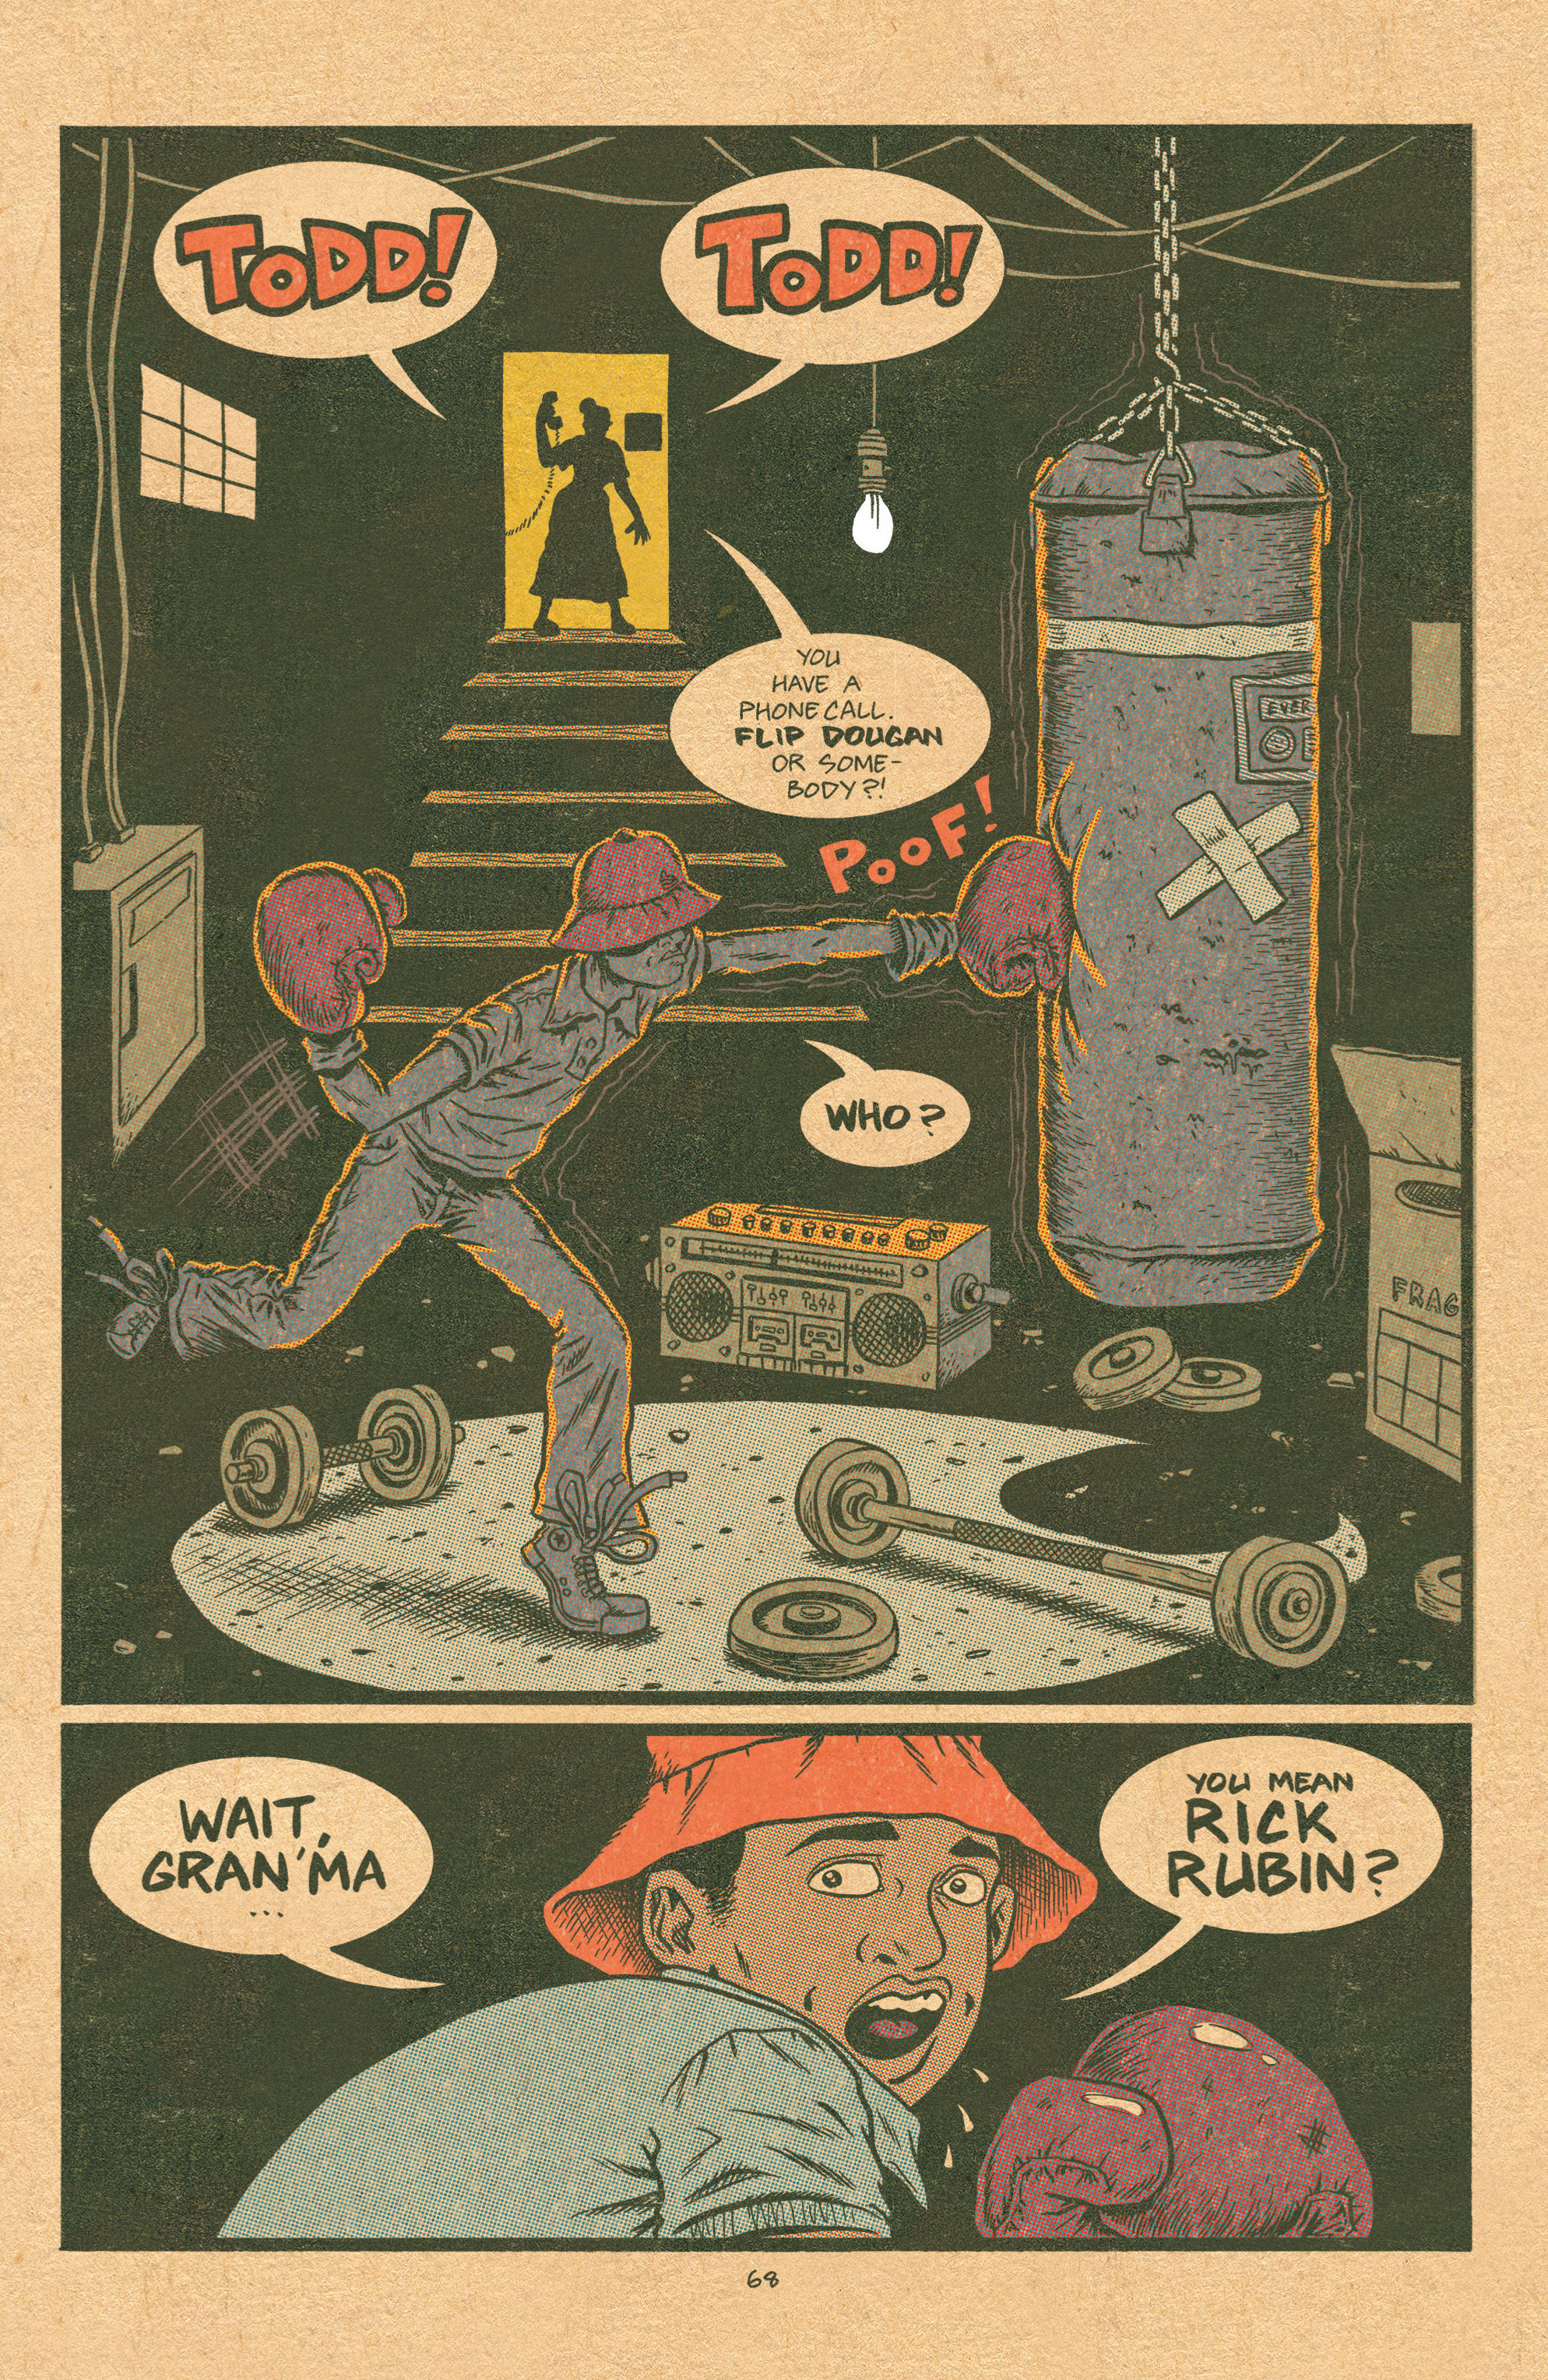 Read online Free Comic Book Day 2015 comic -  Issue # Hip Hop Family Tree Three-in-One - Featuring Cosplayers - 24